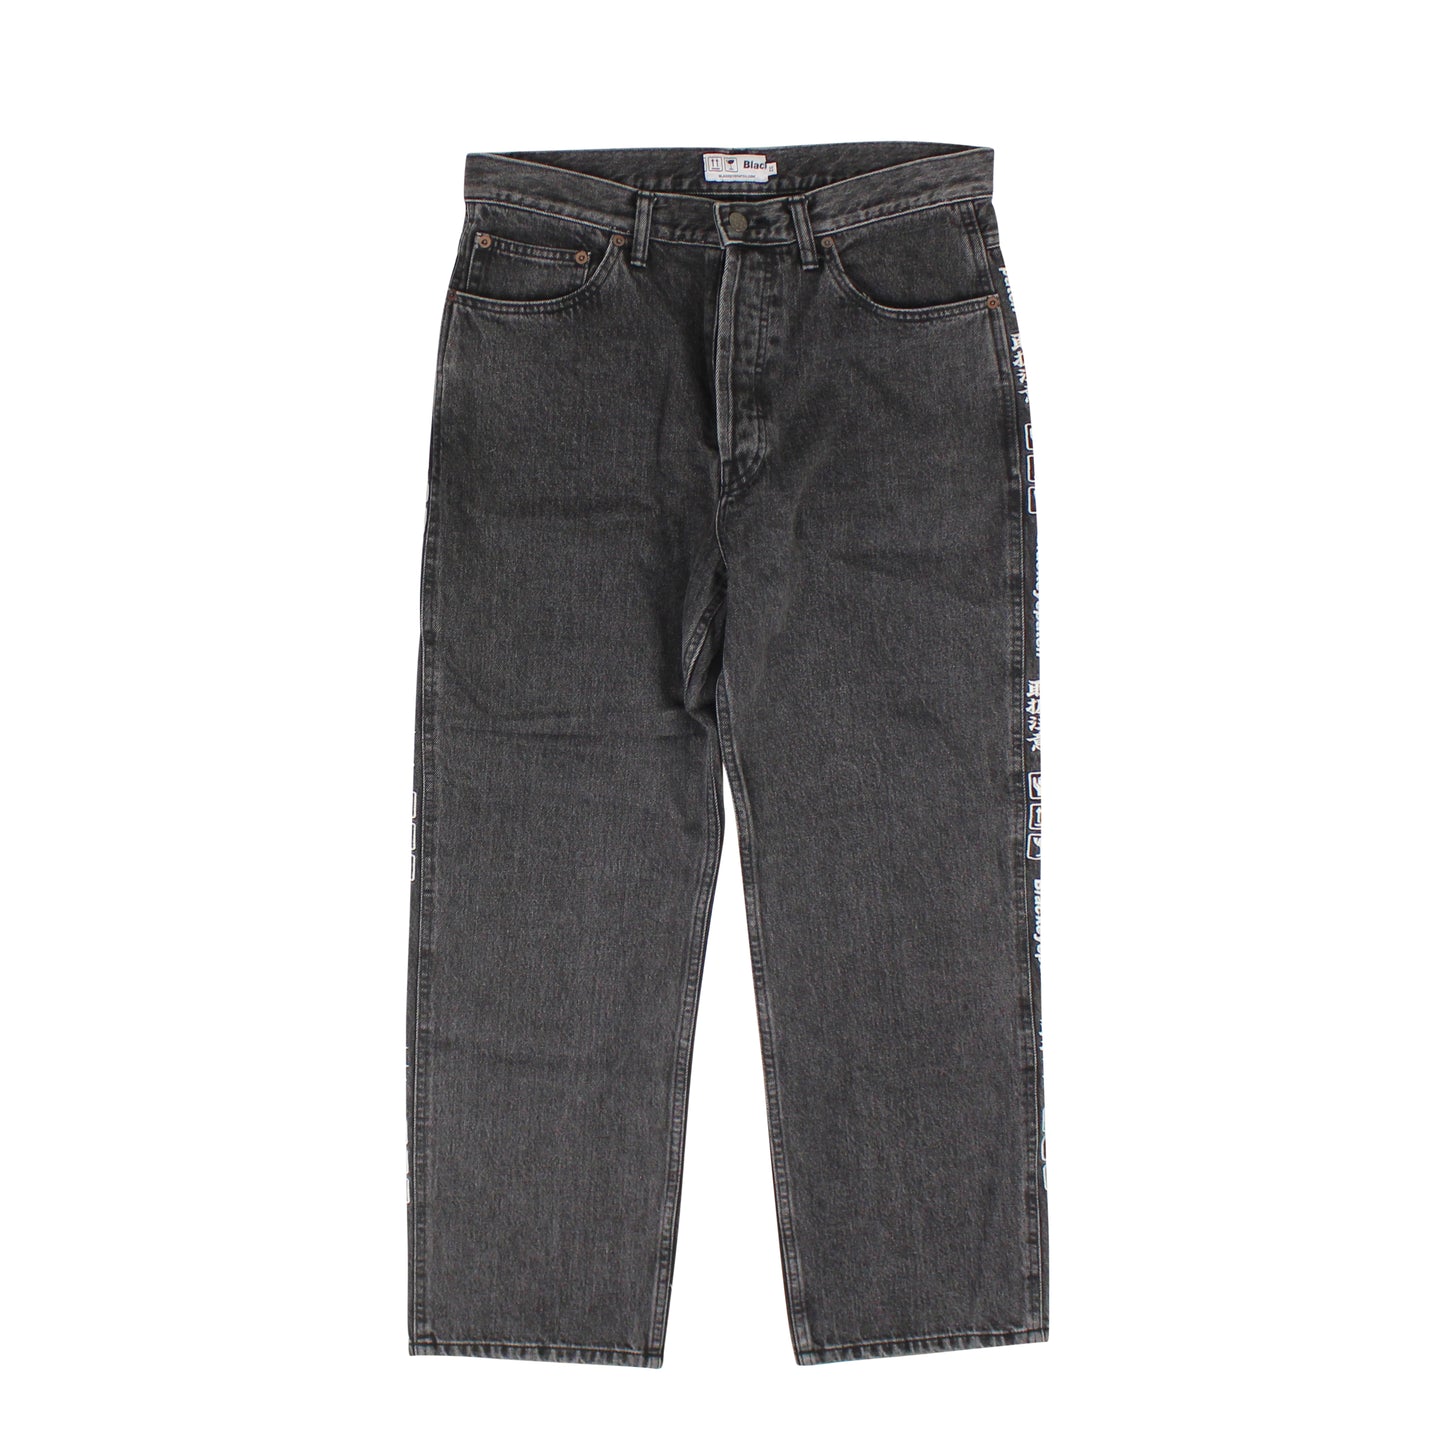 Blackeyepatch Handle With Care Jeans - Black